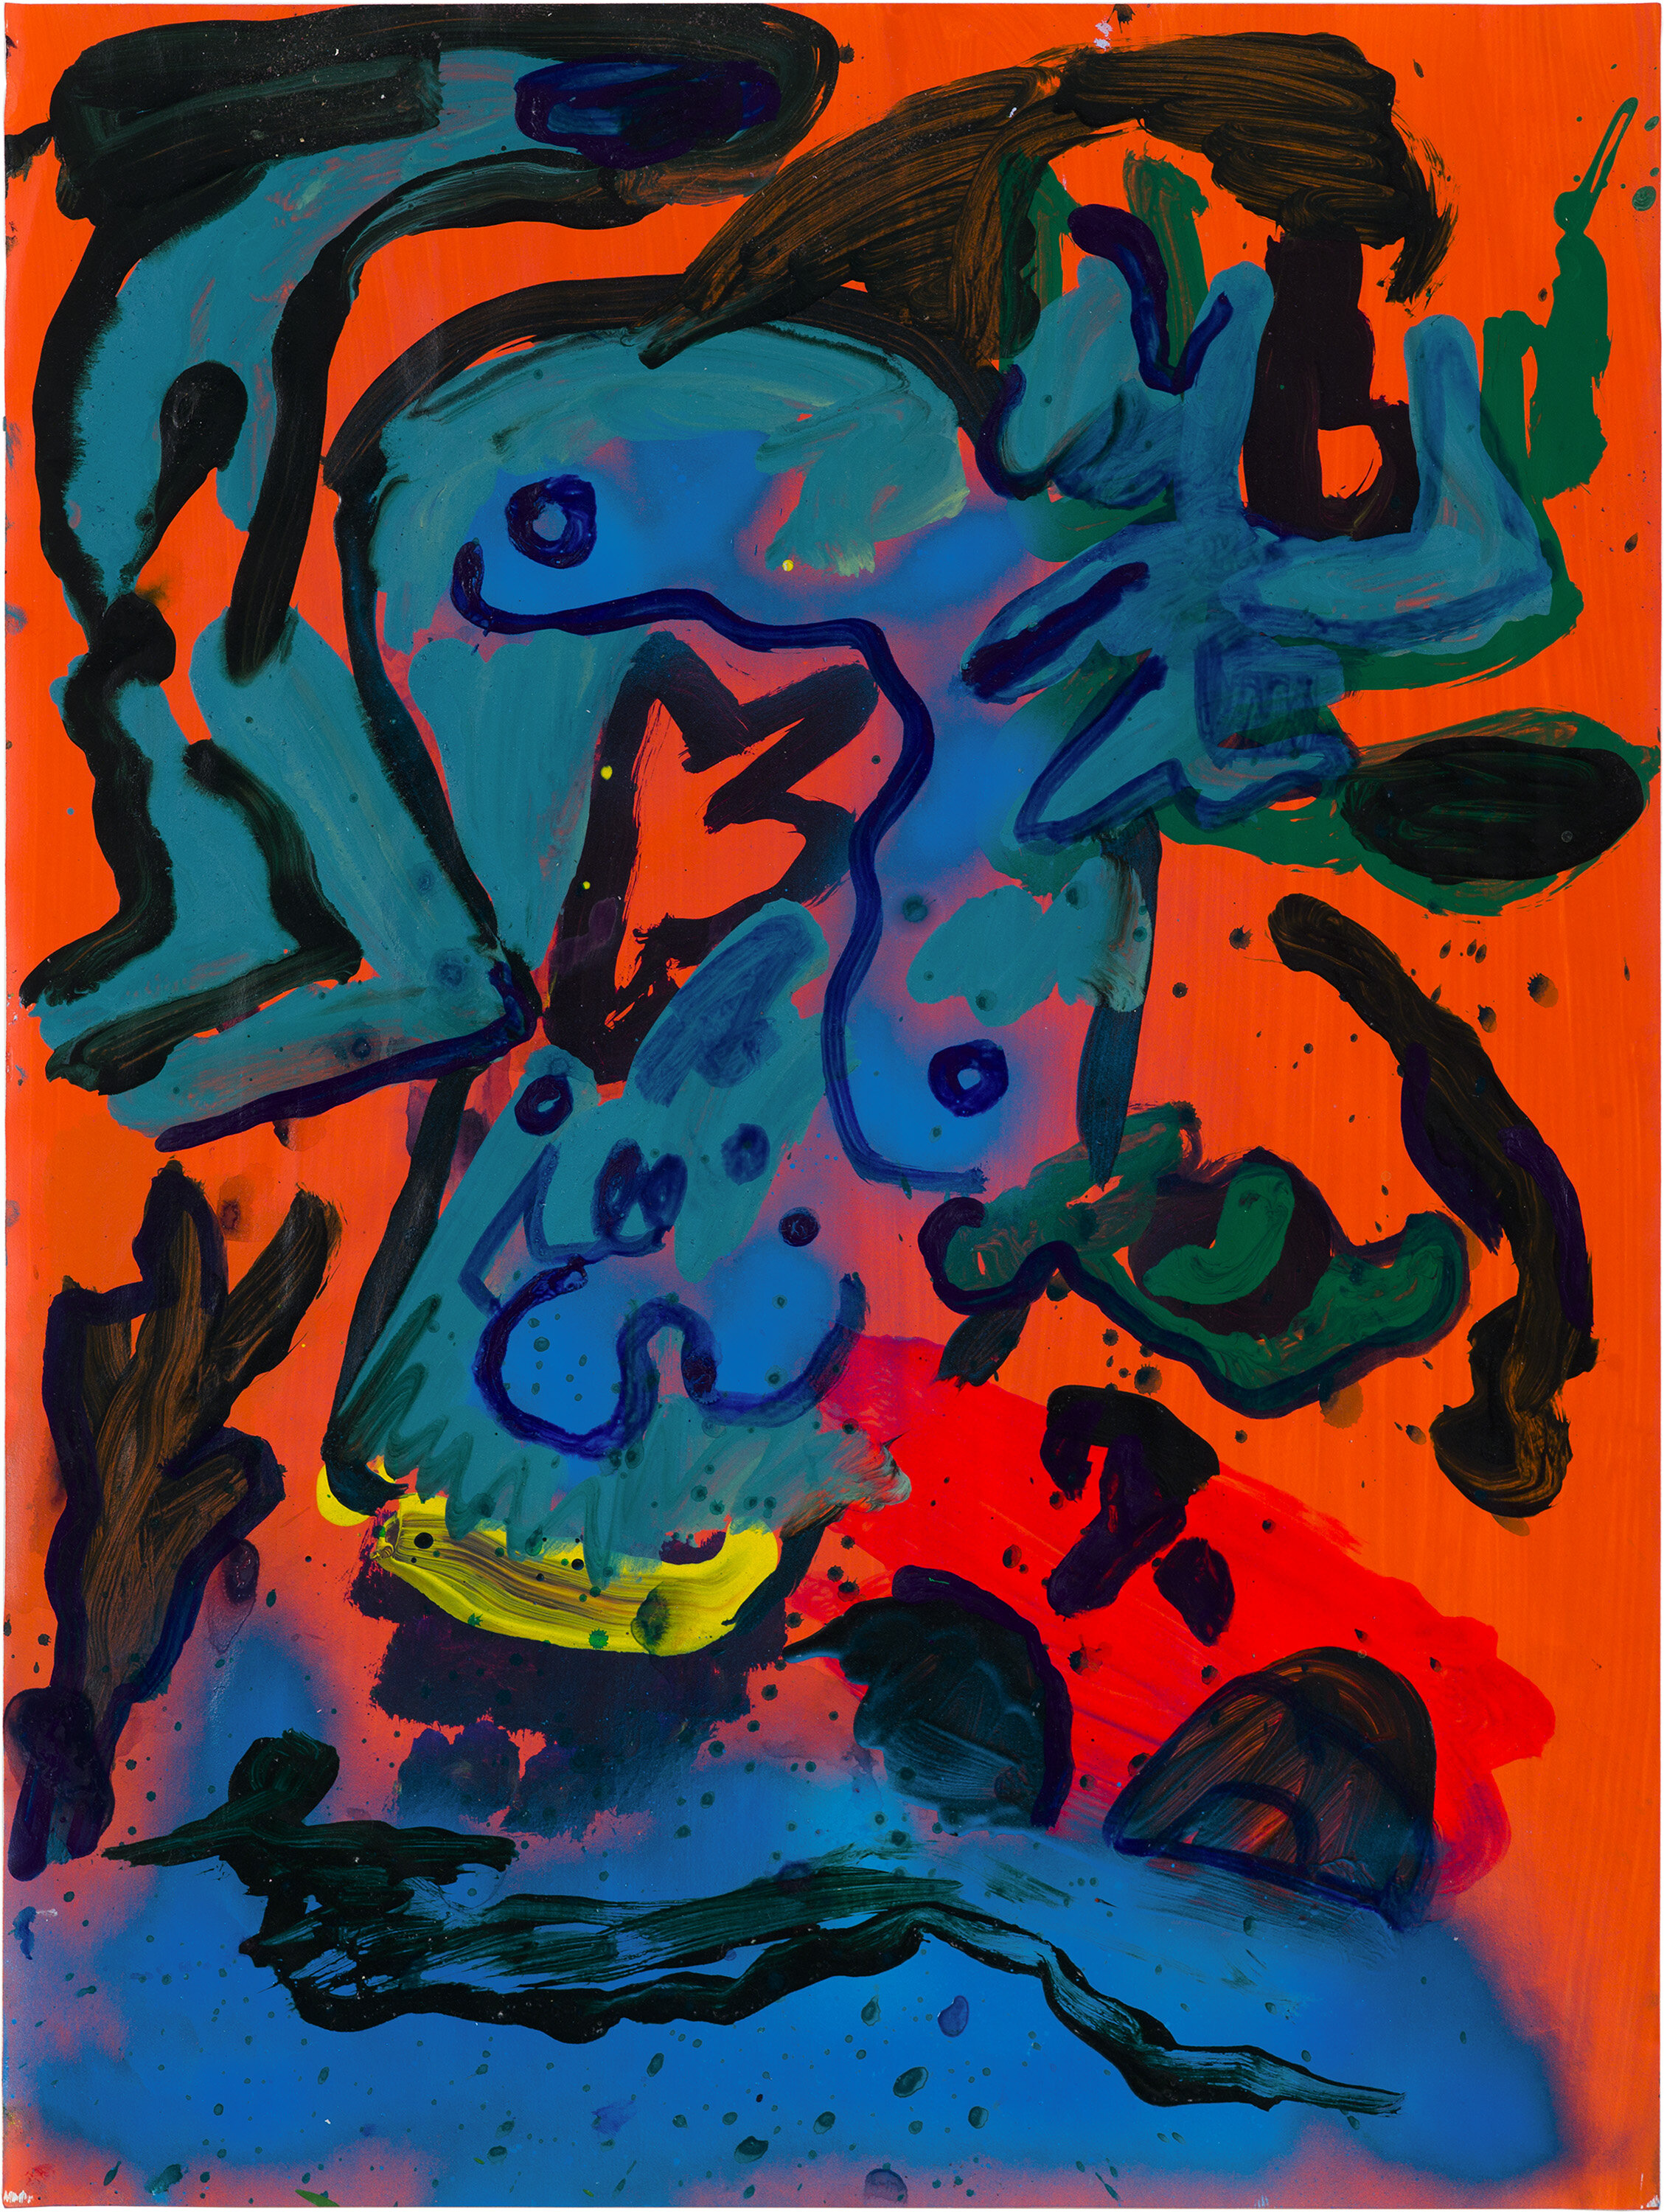  Drew Beattie and Ben Shepard   DBBS-DRW-2015-090   2015  acrylic and spray paint on paper  24 x 18 inches 